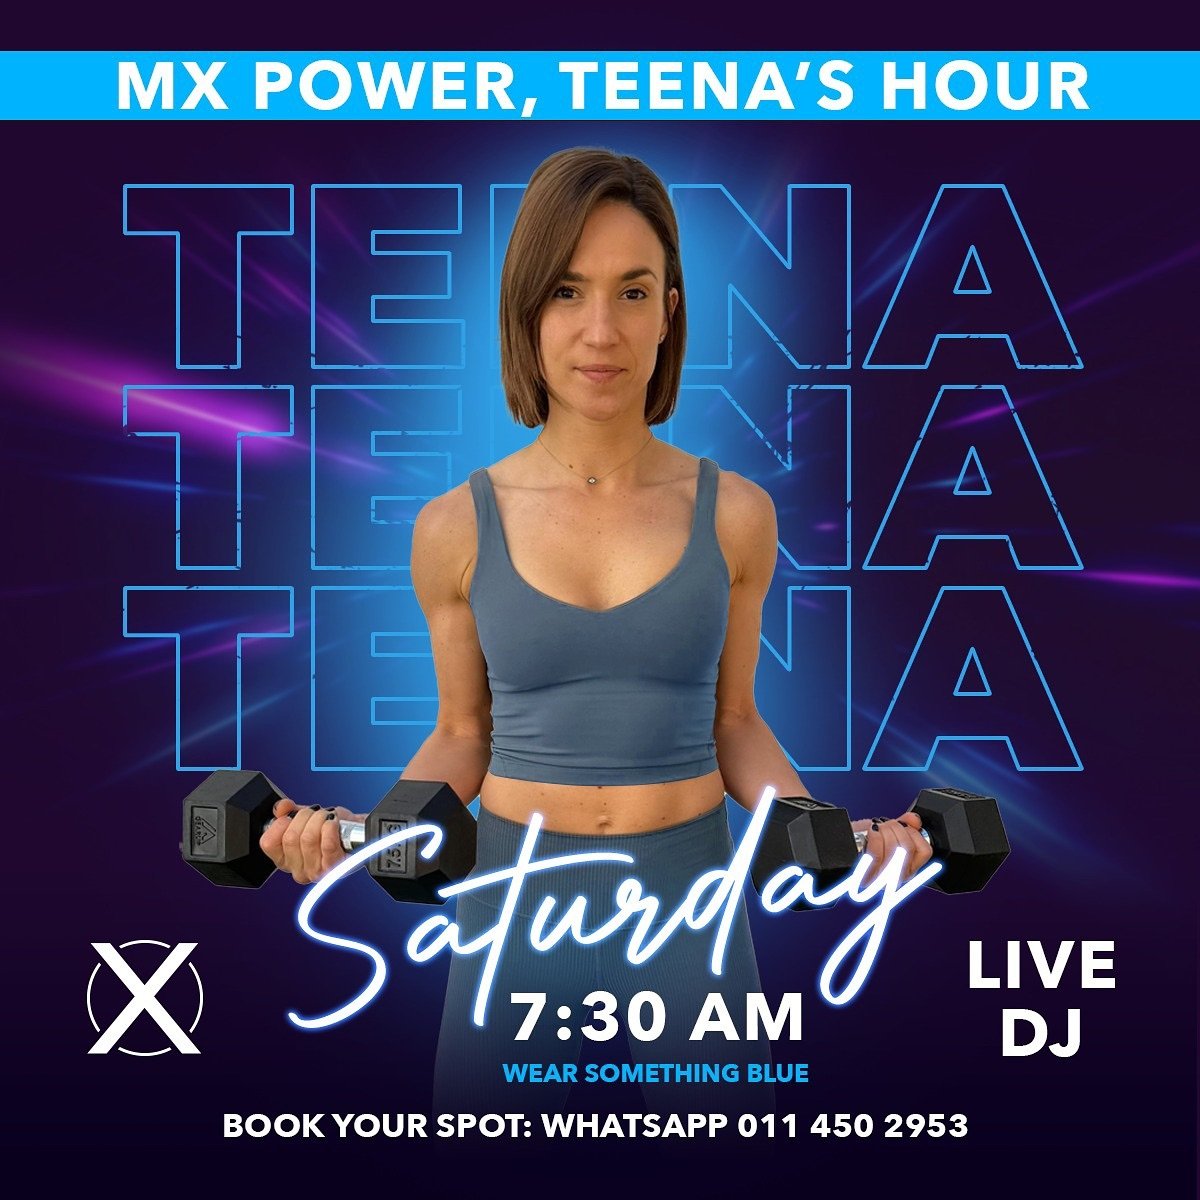 Get ready for a kick-ass class with Teena this Saturday!

&bull;Date: April 20, 2024
&bull;Time: 7:30 am
&bull;Live DJ
&bull;Dress code: Something blue 💙

Book your spot: WhatsApp 011 450 2953

#fitnessgoals #hiittraining #saturdayworkout #fitnessmo